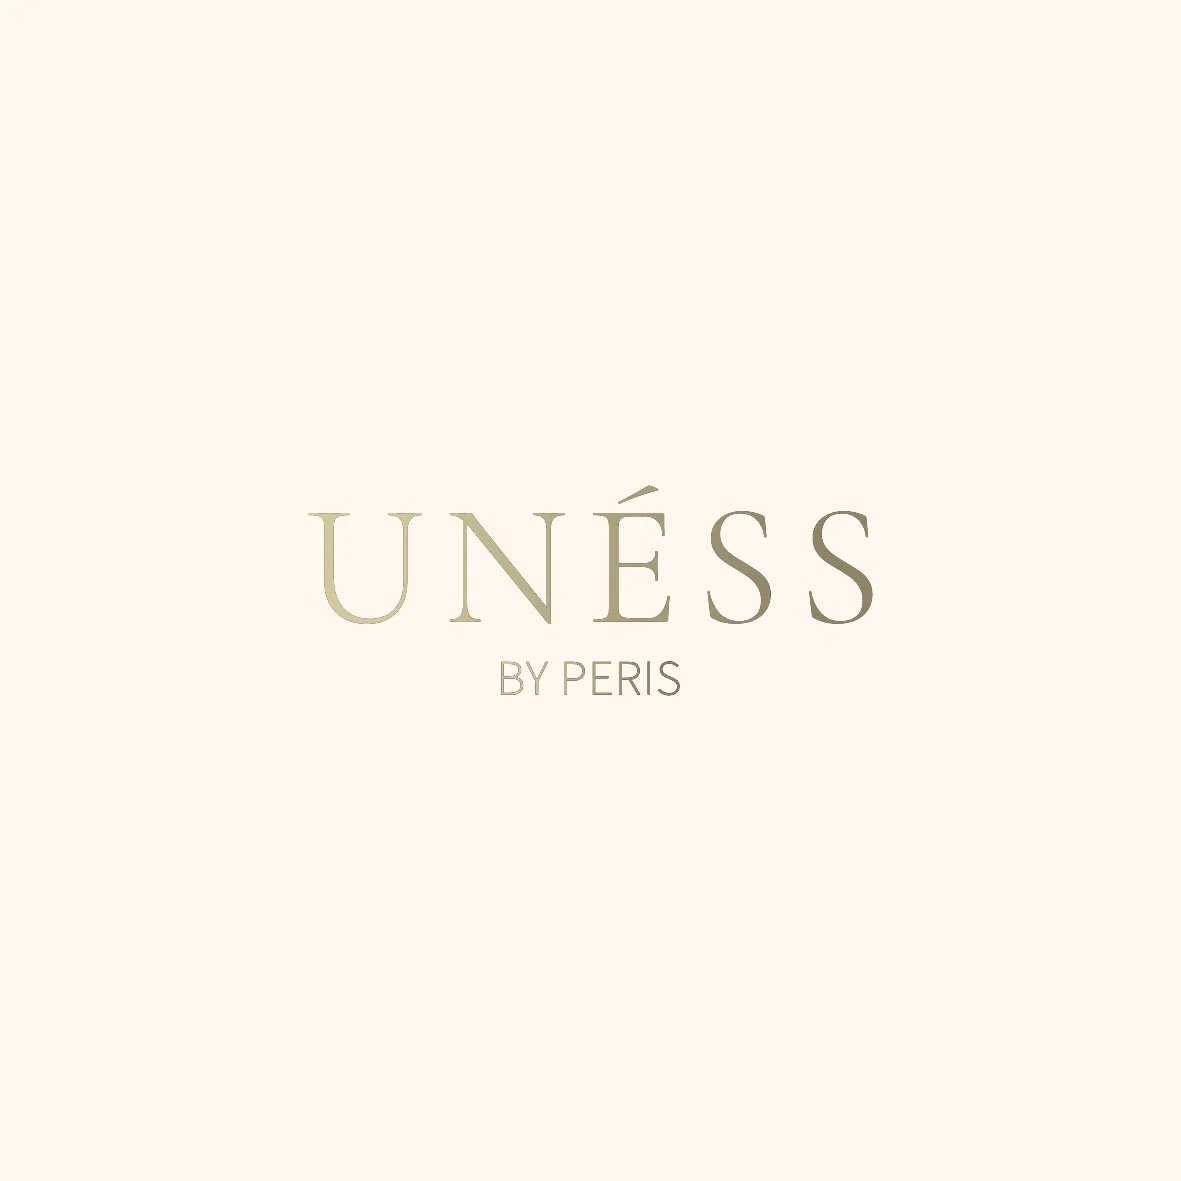 UNESS by Peris